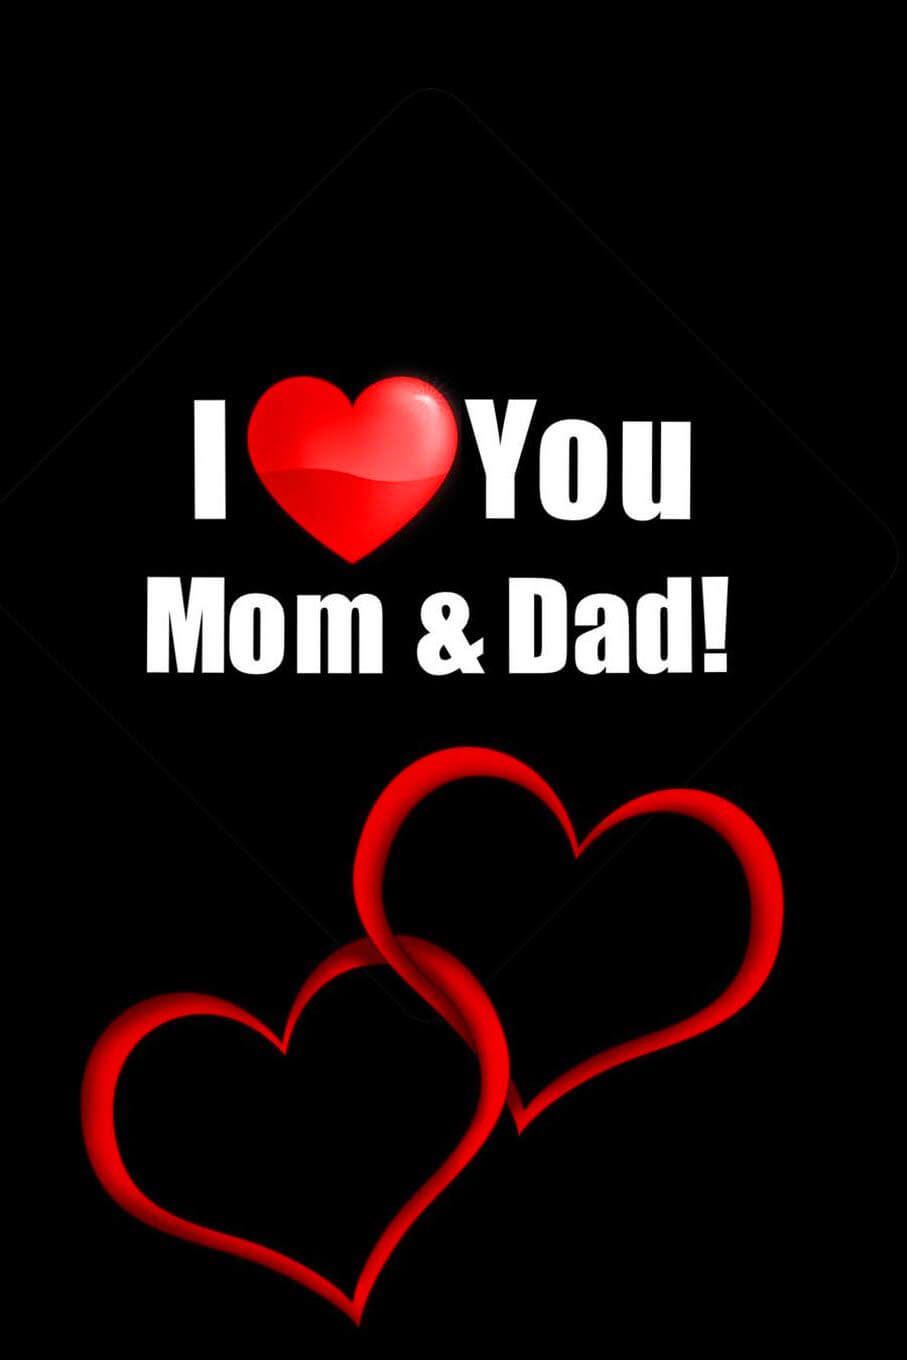 Mom and Dad Dp Profile For Whatsapp Images pics download